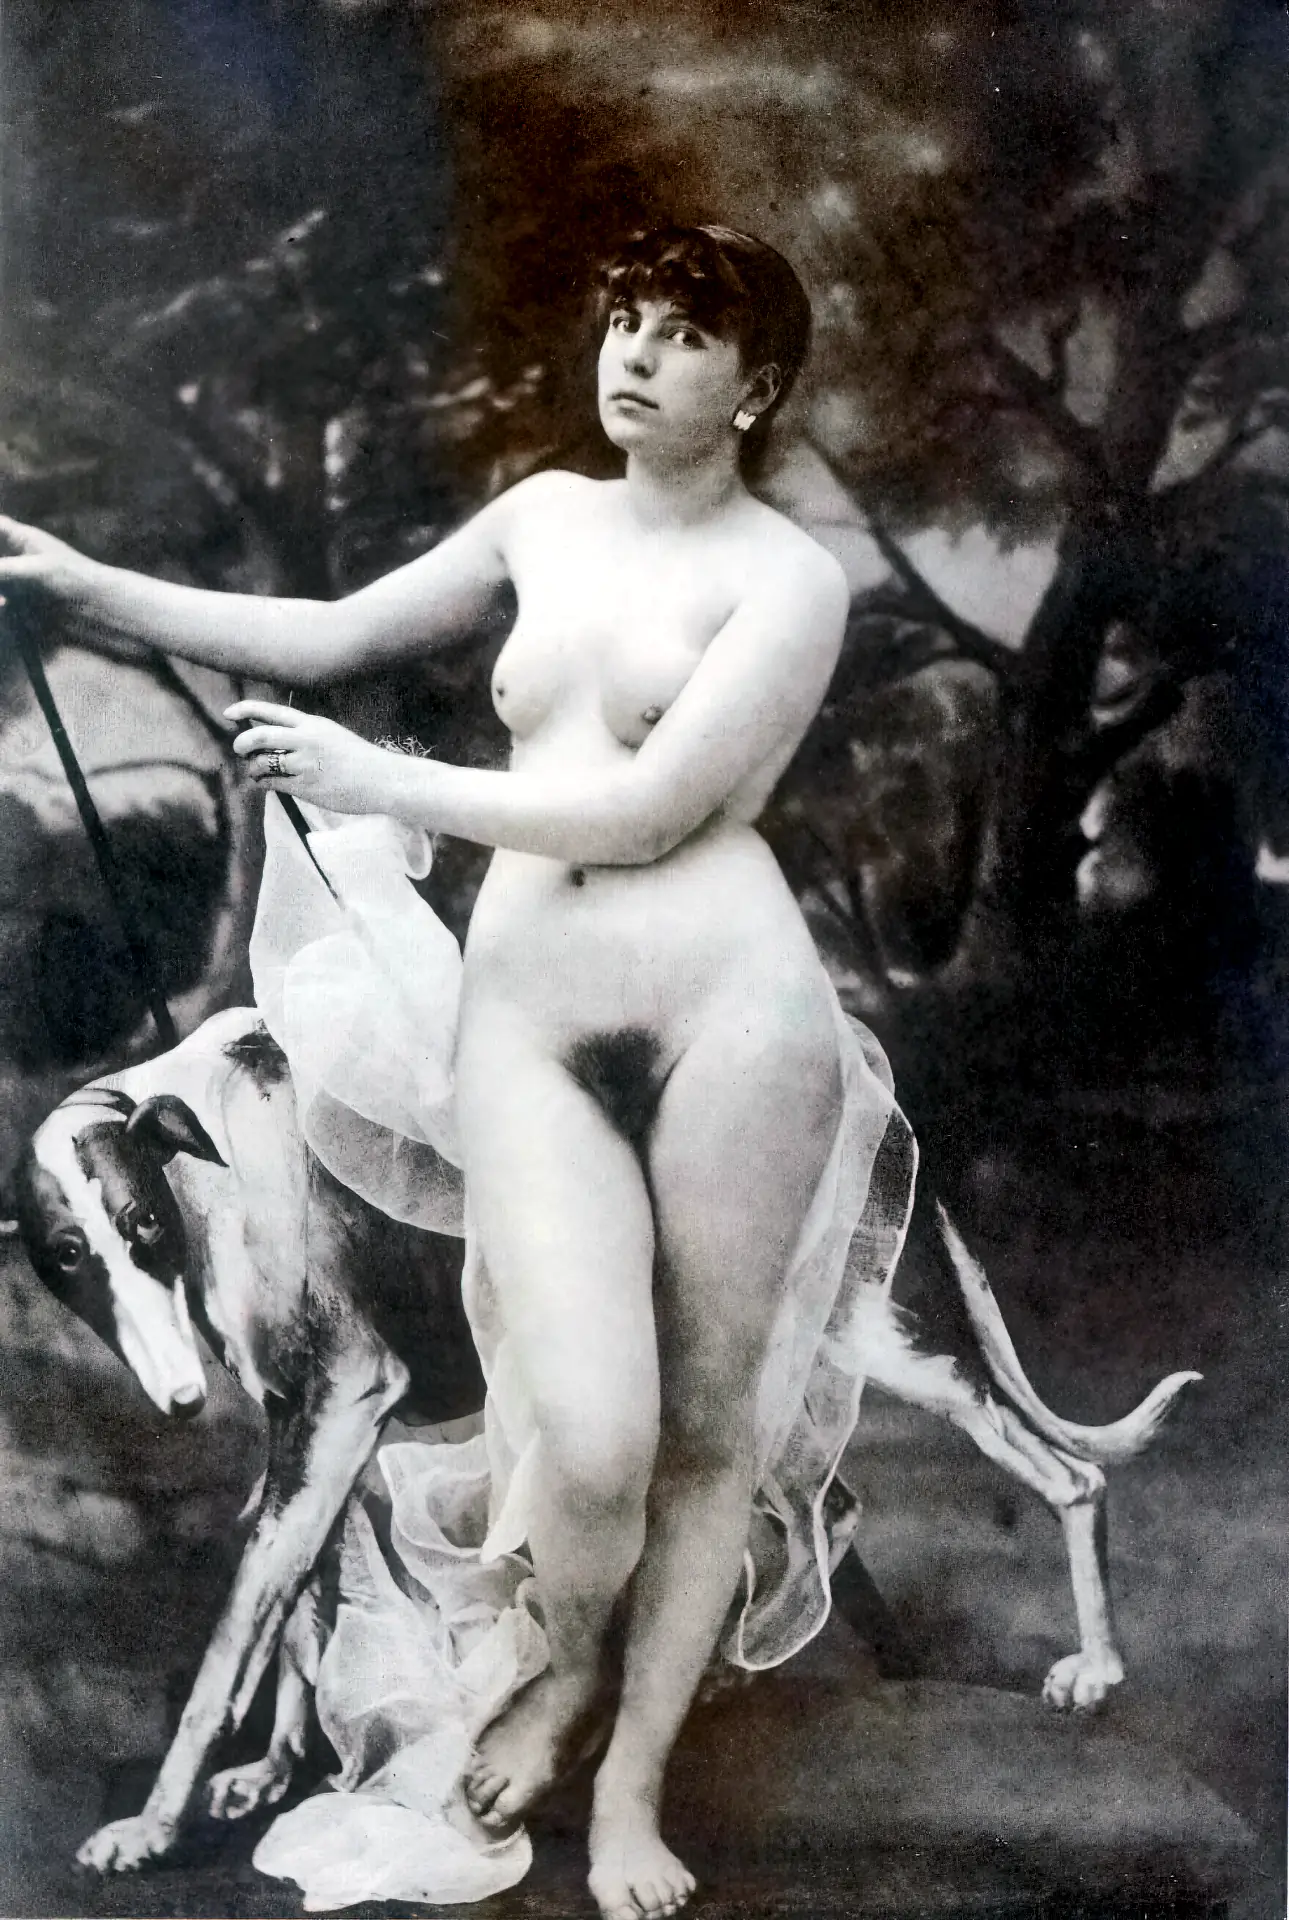 Vintage girl gives a dramatic look while posing naked with her dog